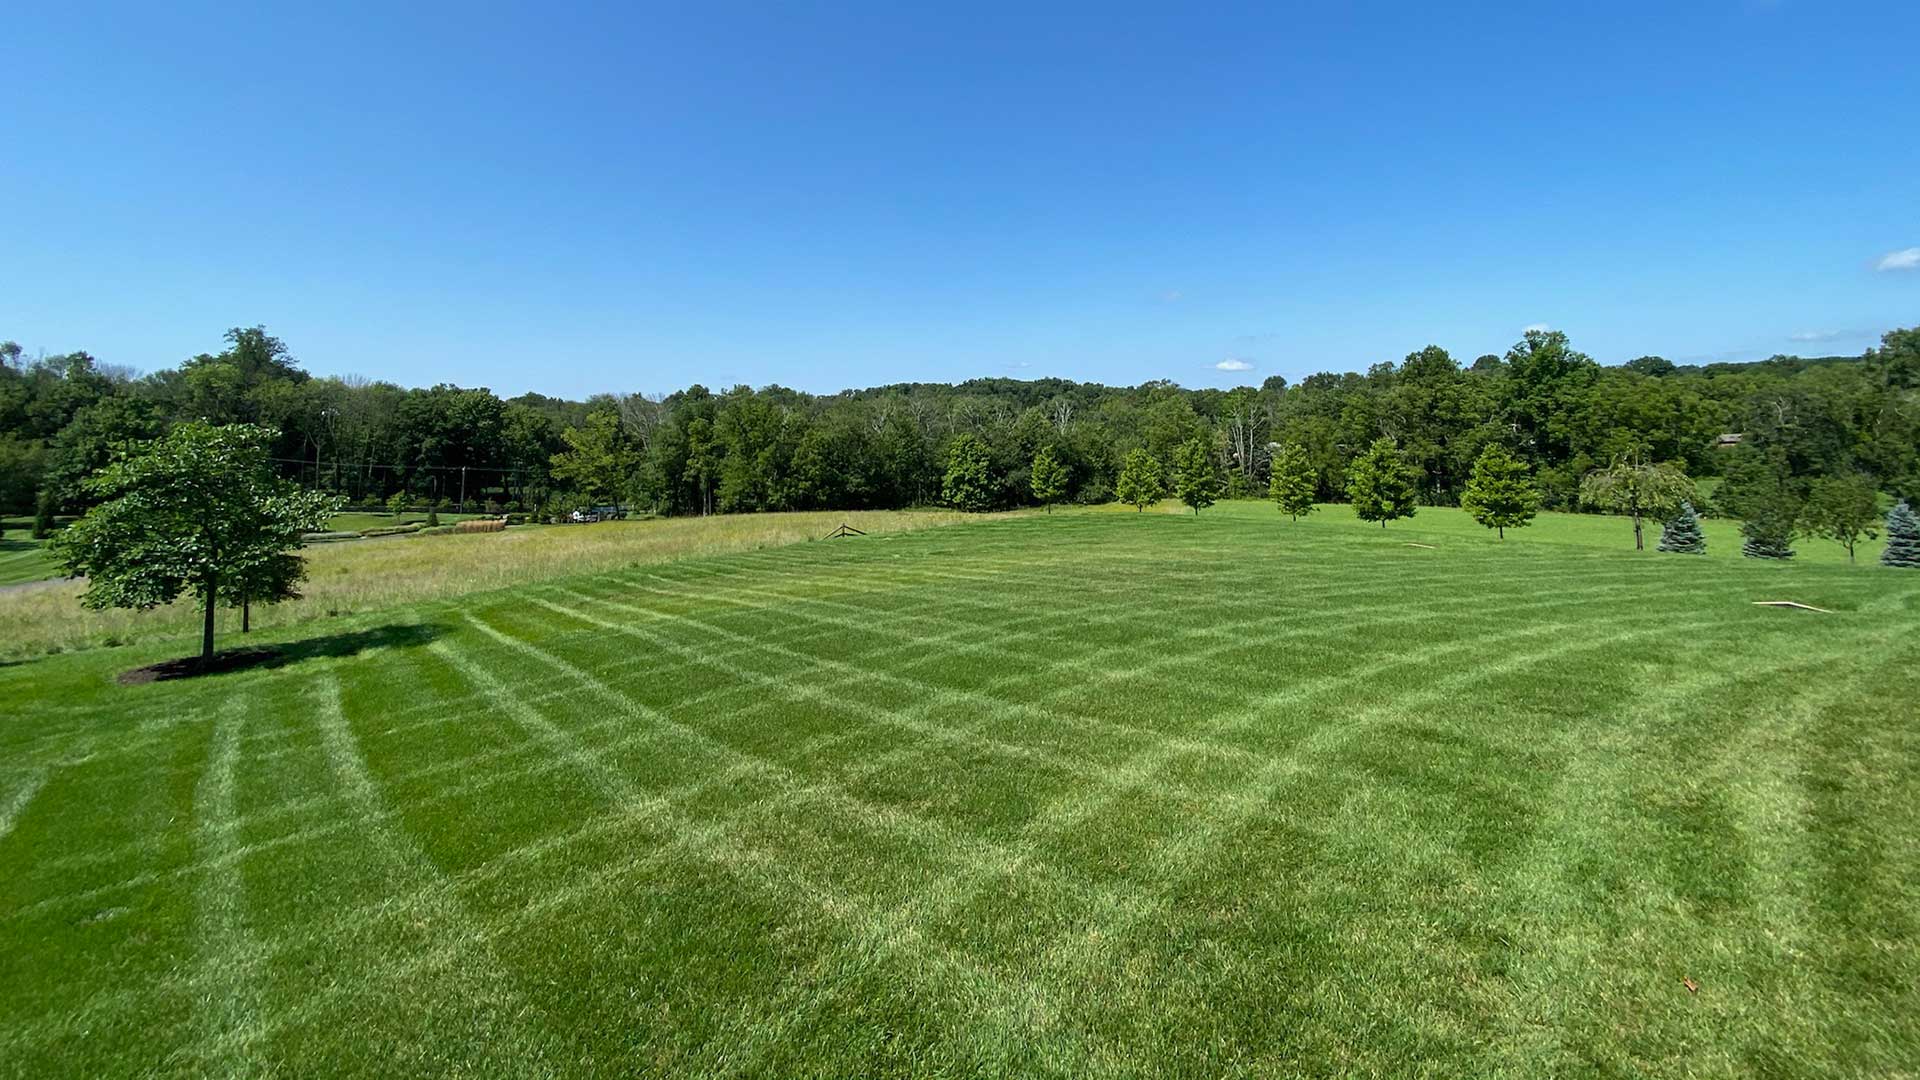 Large, open field with mowing lines near Souderton, PA.